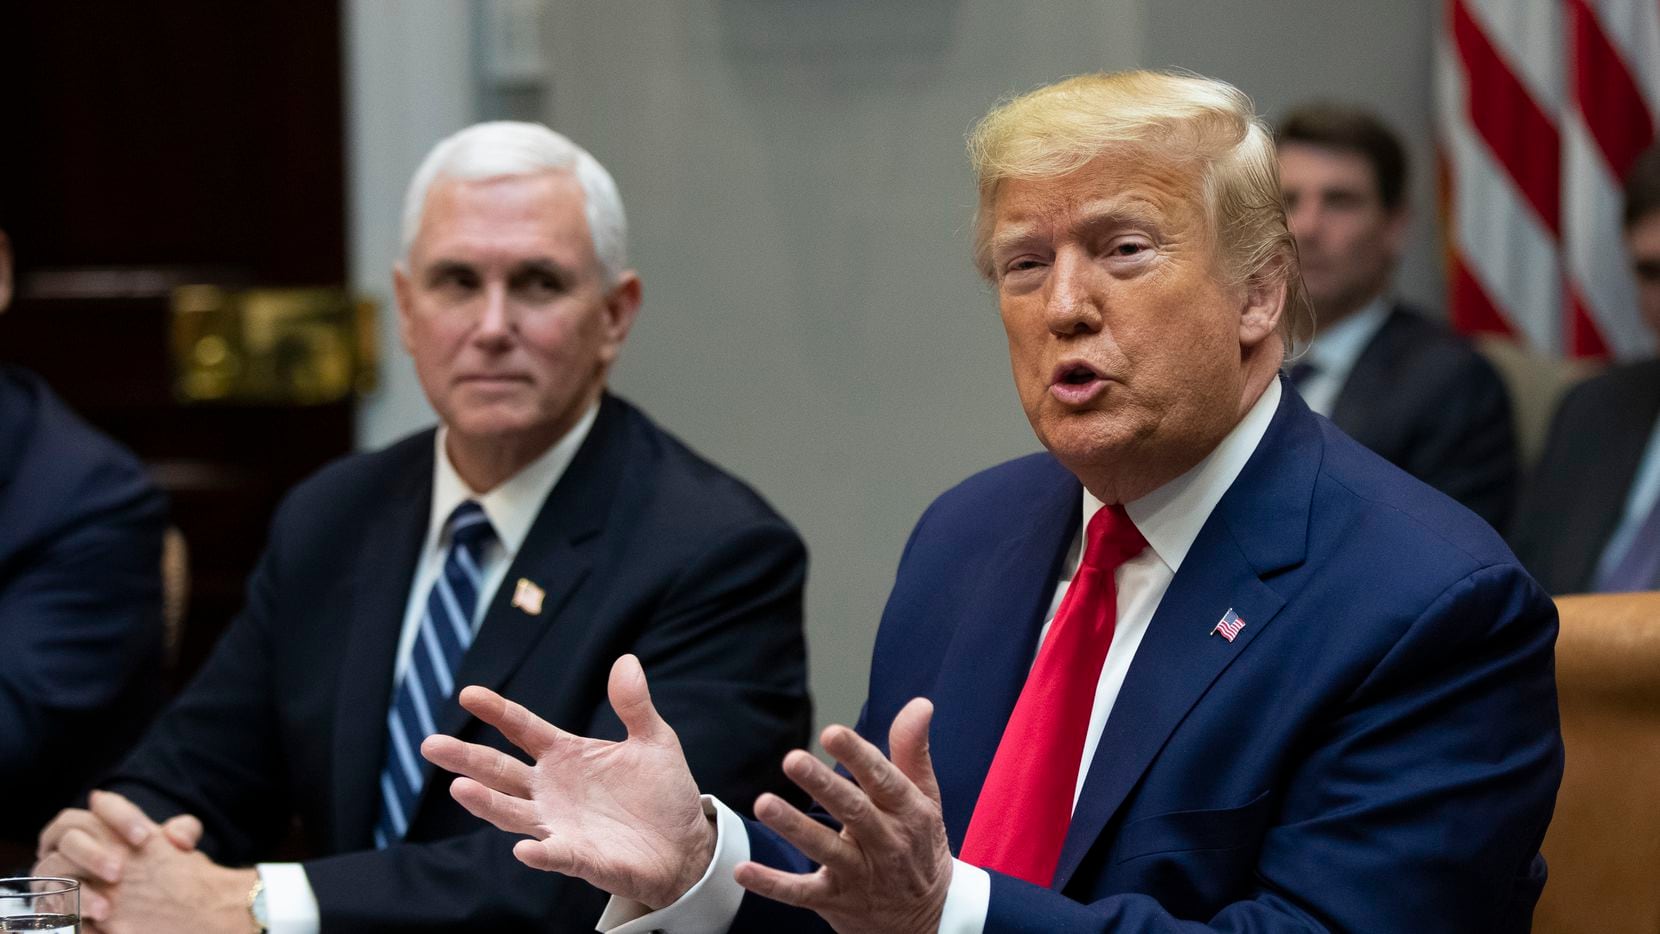 President Donald Trump with Vice President Mike Pence, speaks during a coronavirus briefing with Airline CEOs in the Roosevelt Room of the White House, Wednesday, March 4, 2020, in Washington. (AP Photo/Manuel Balce Ceneta)